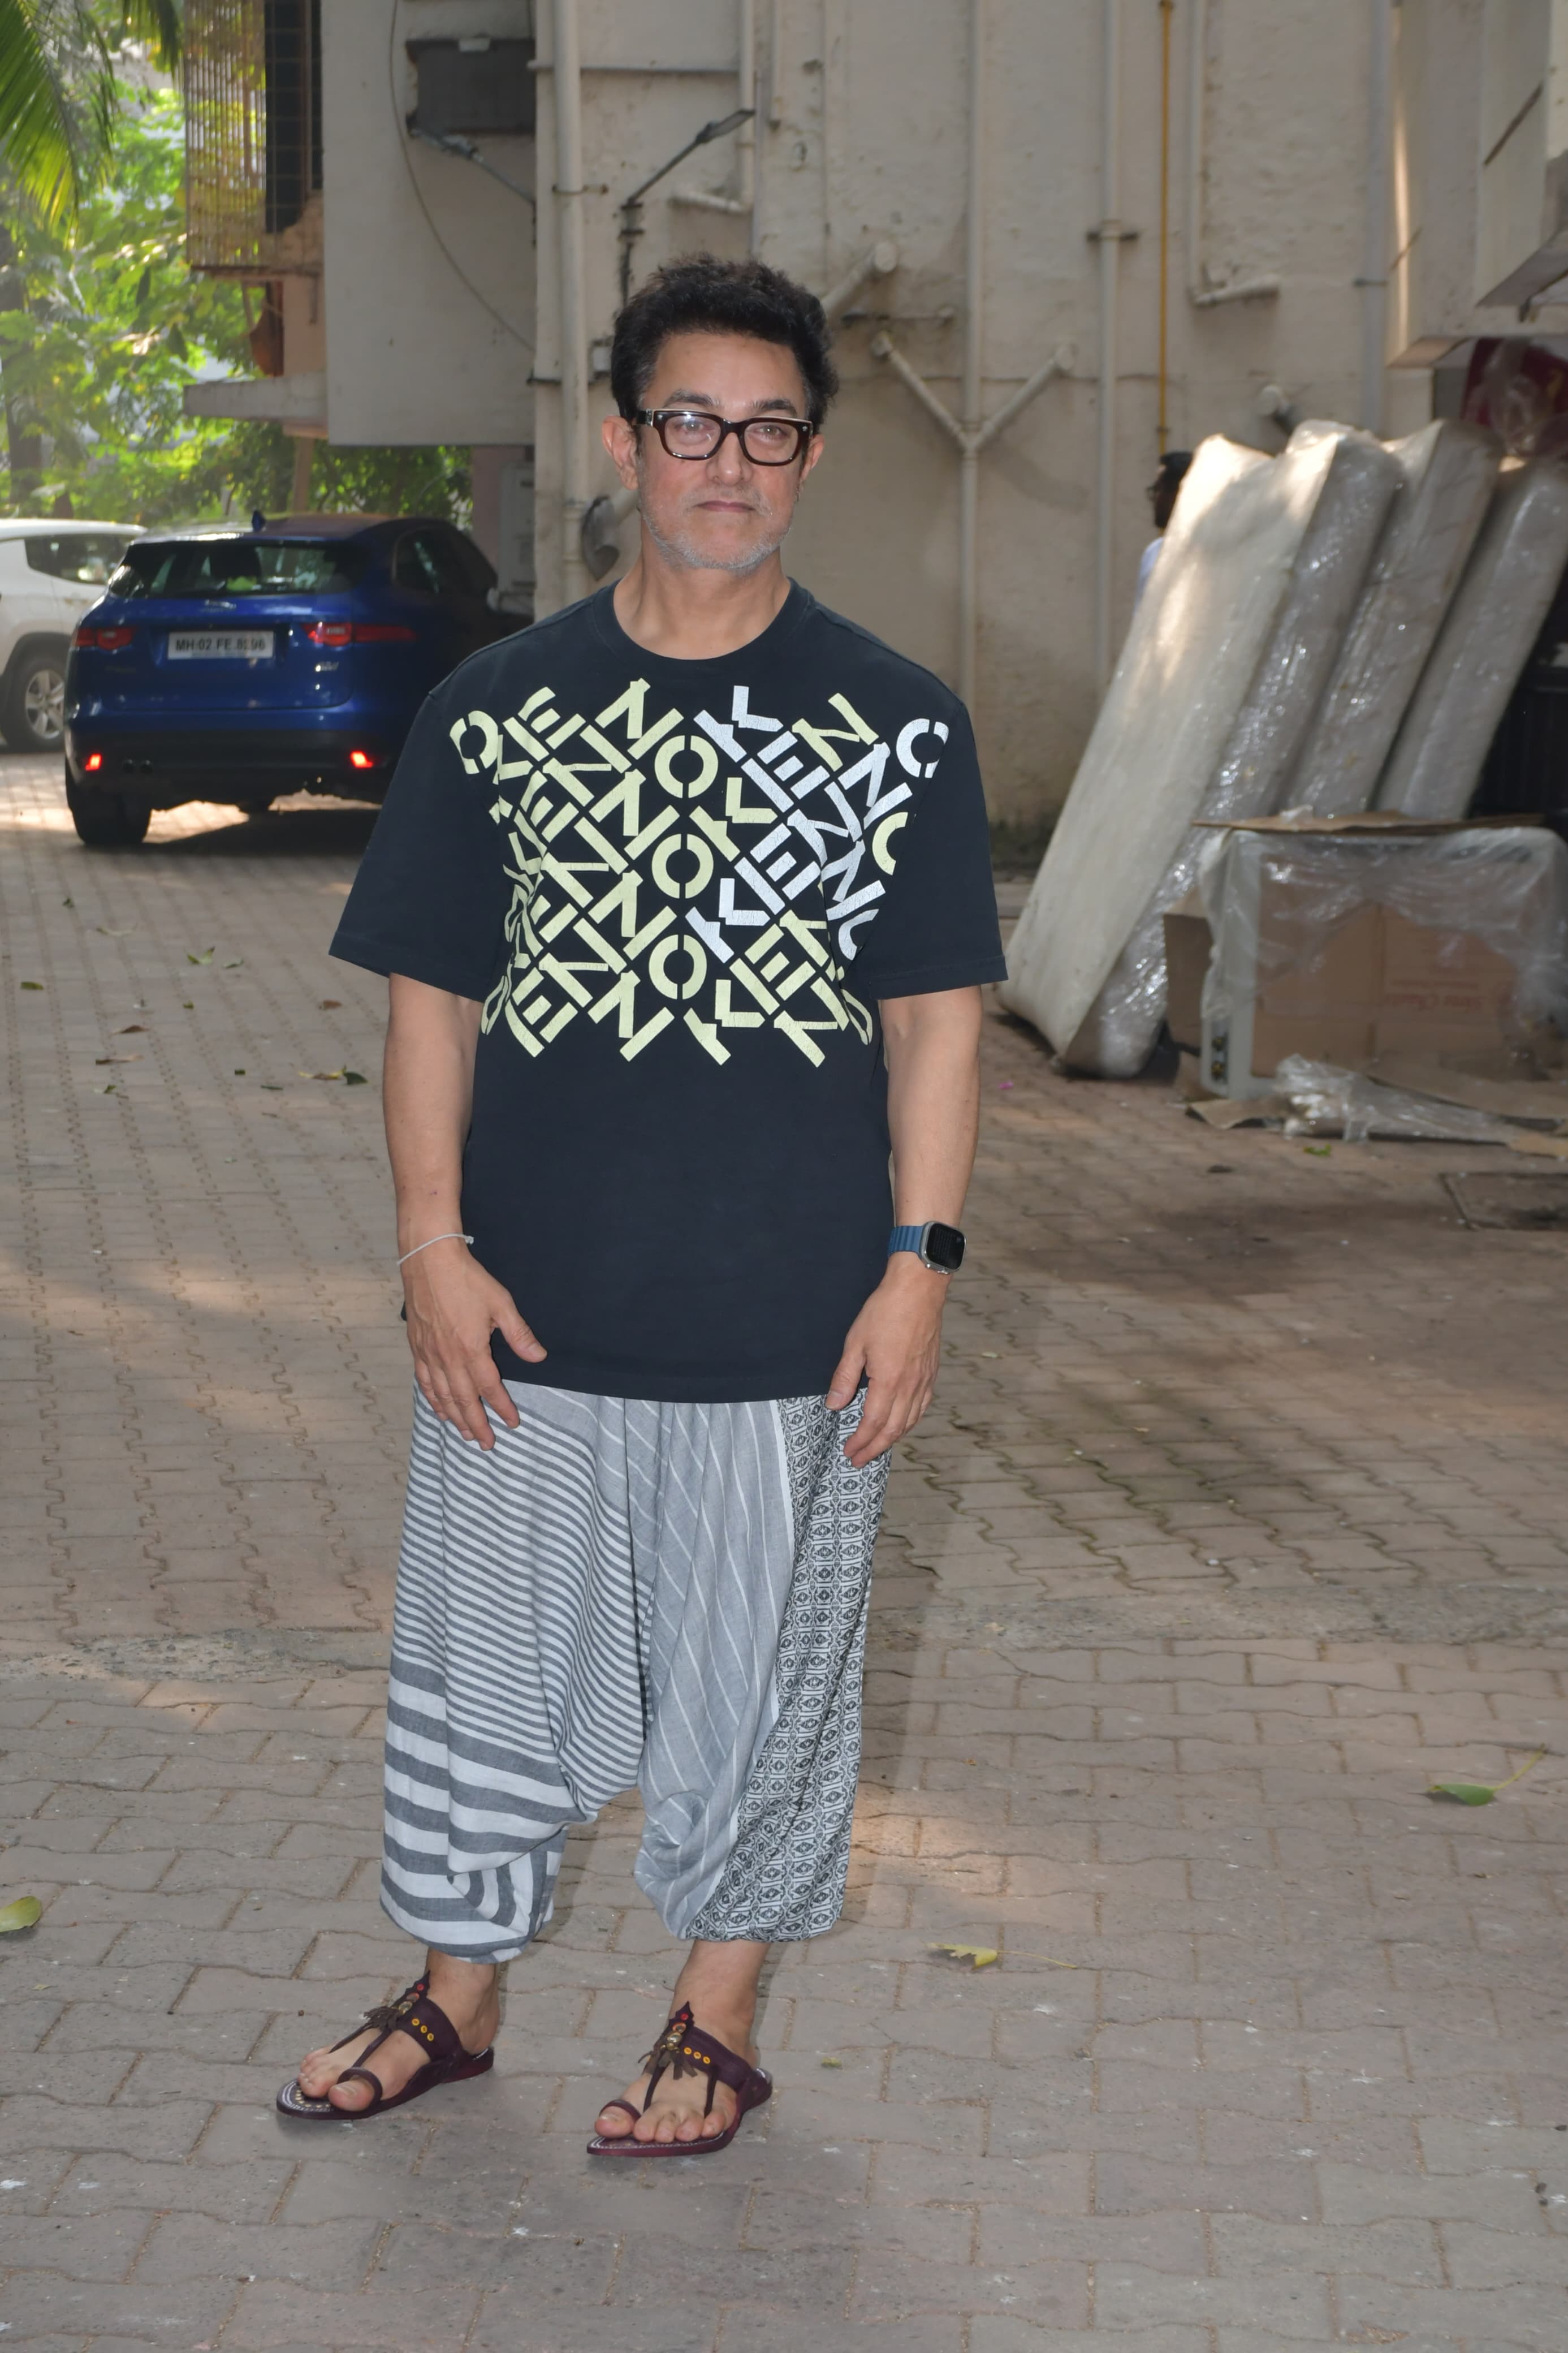 Aamir Khan was snapped in a comfy outfit ahead of her daughter Ira Khan's wedding